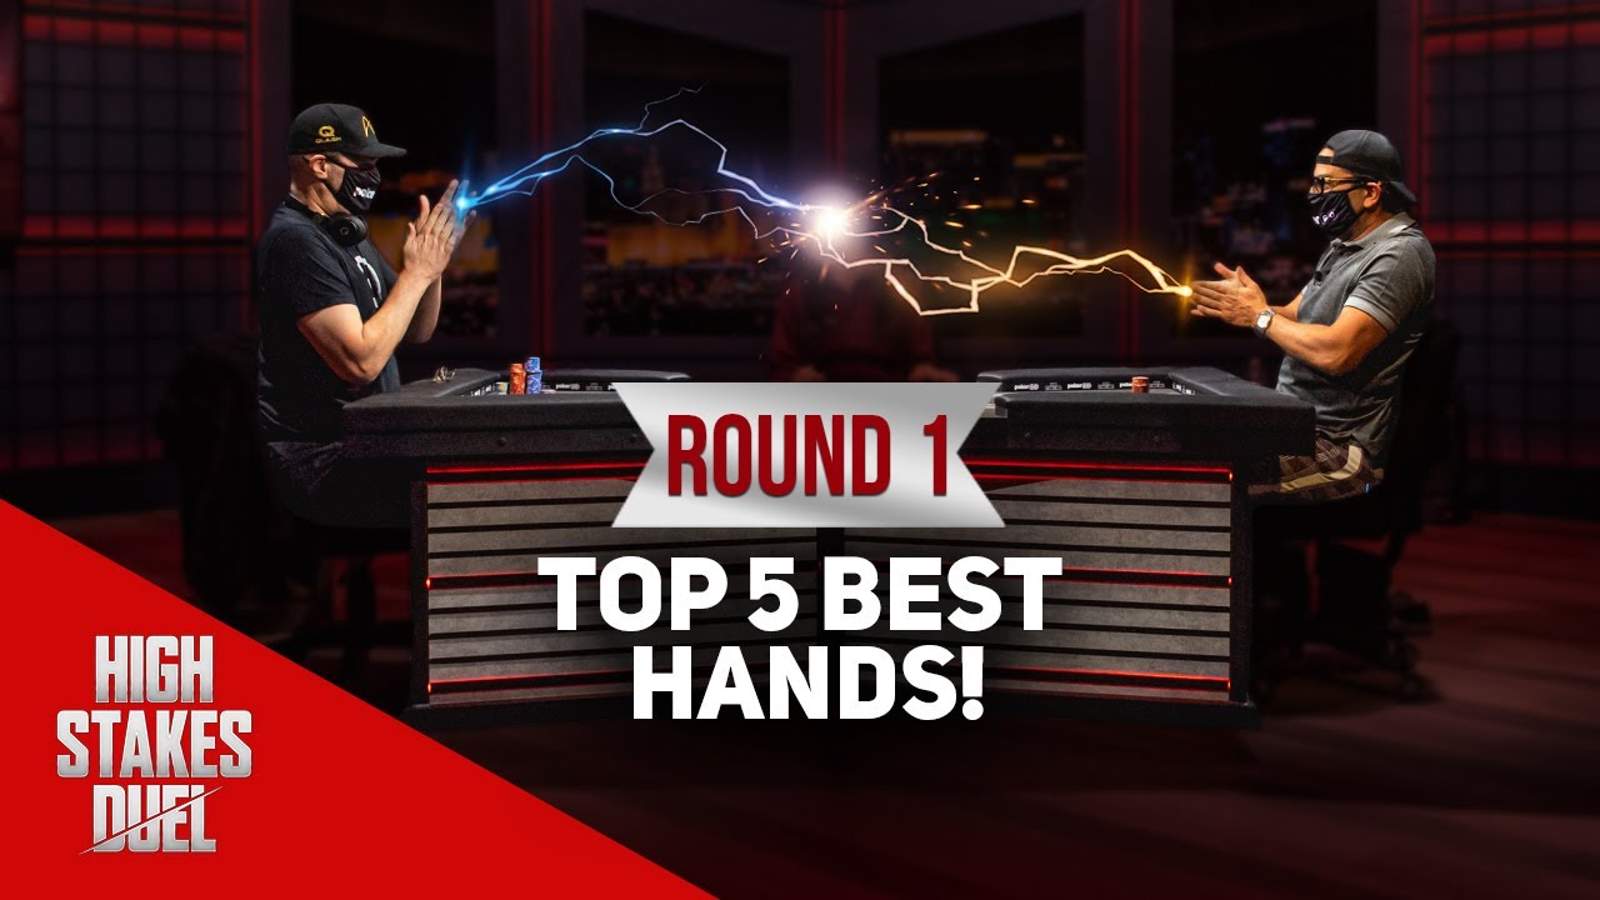 Watch the Best High Stakes Duel Round 1 Hands!